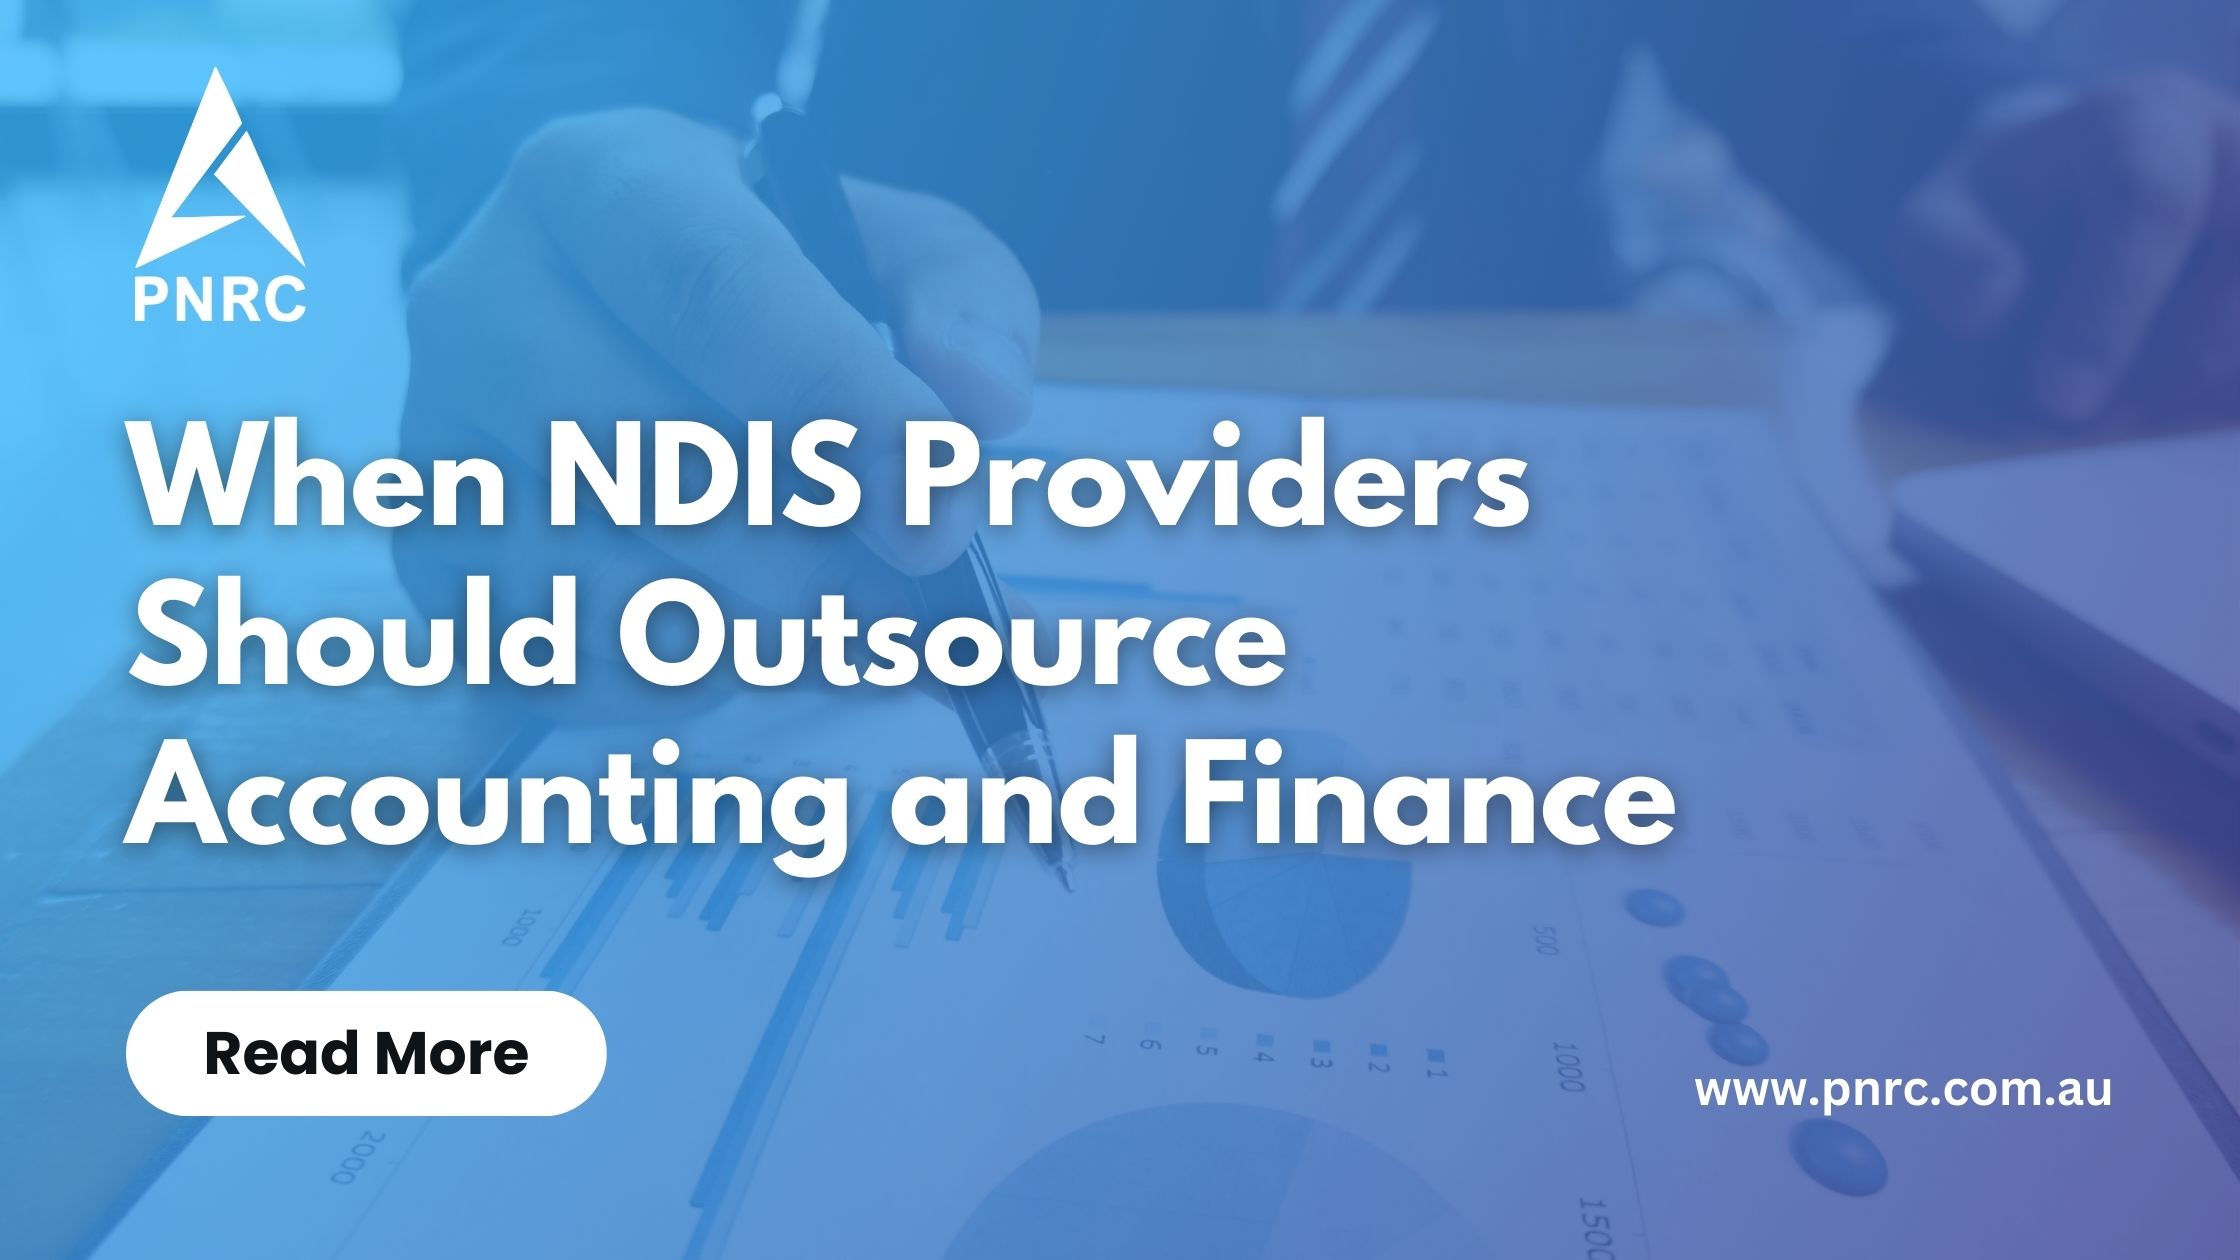 When NDIS Providers Should Outsource Accounting and Finance